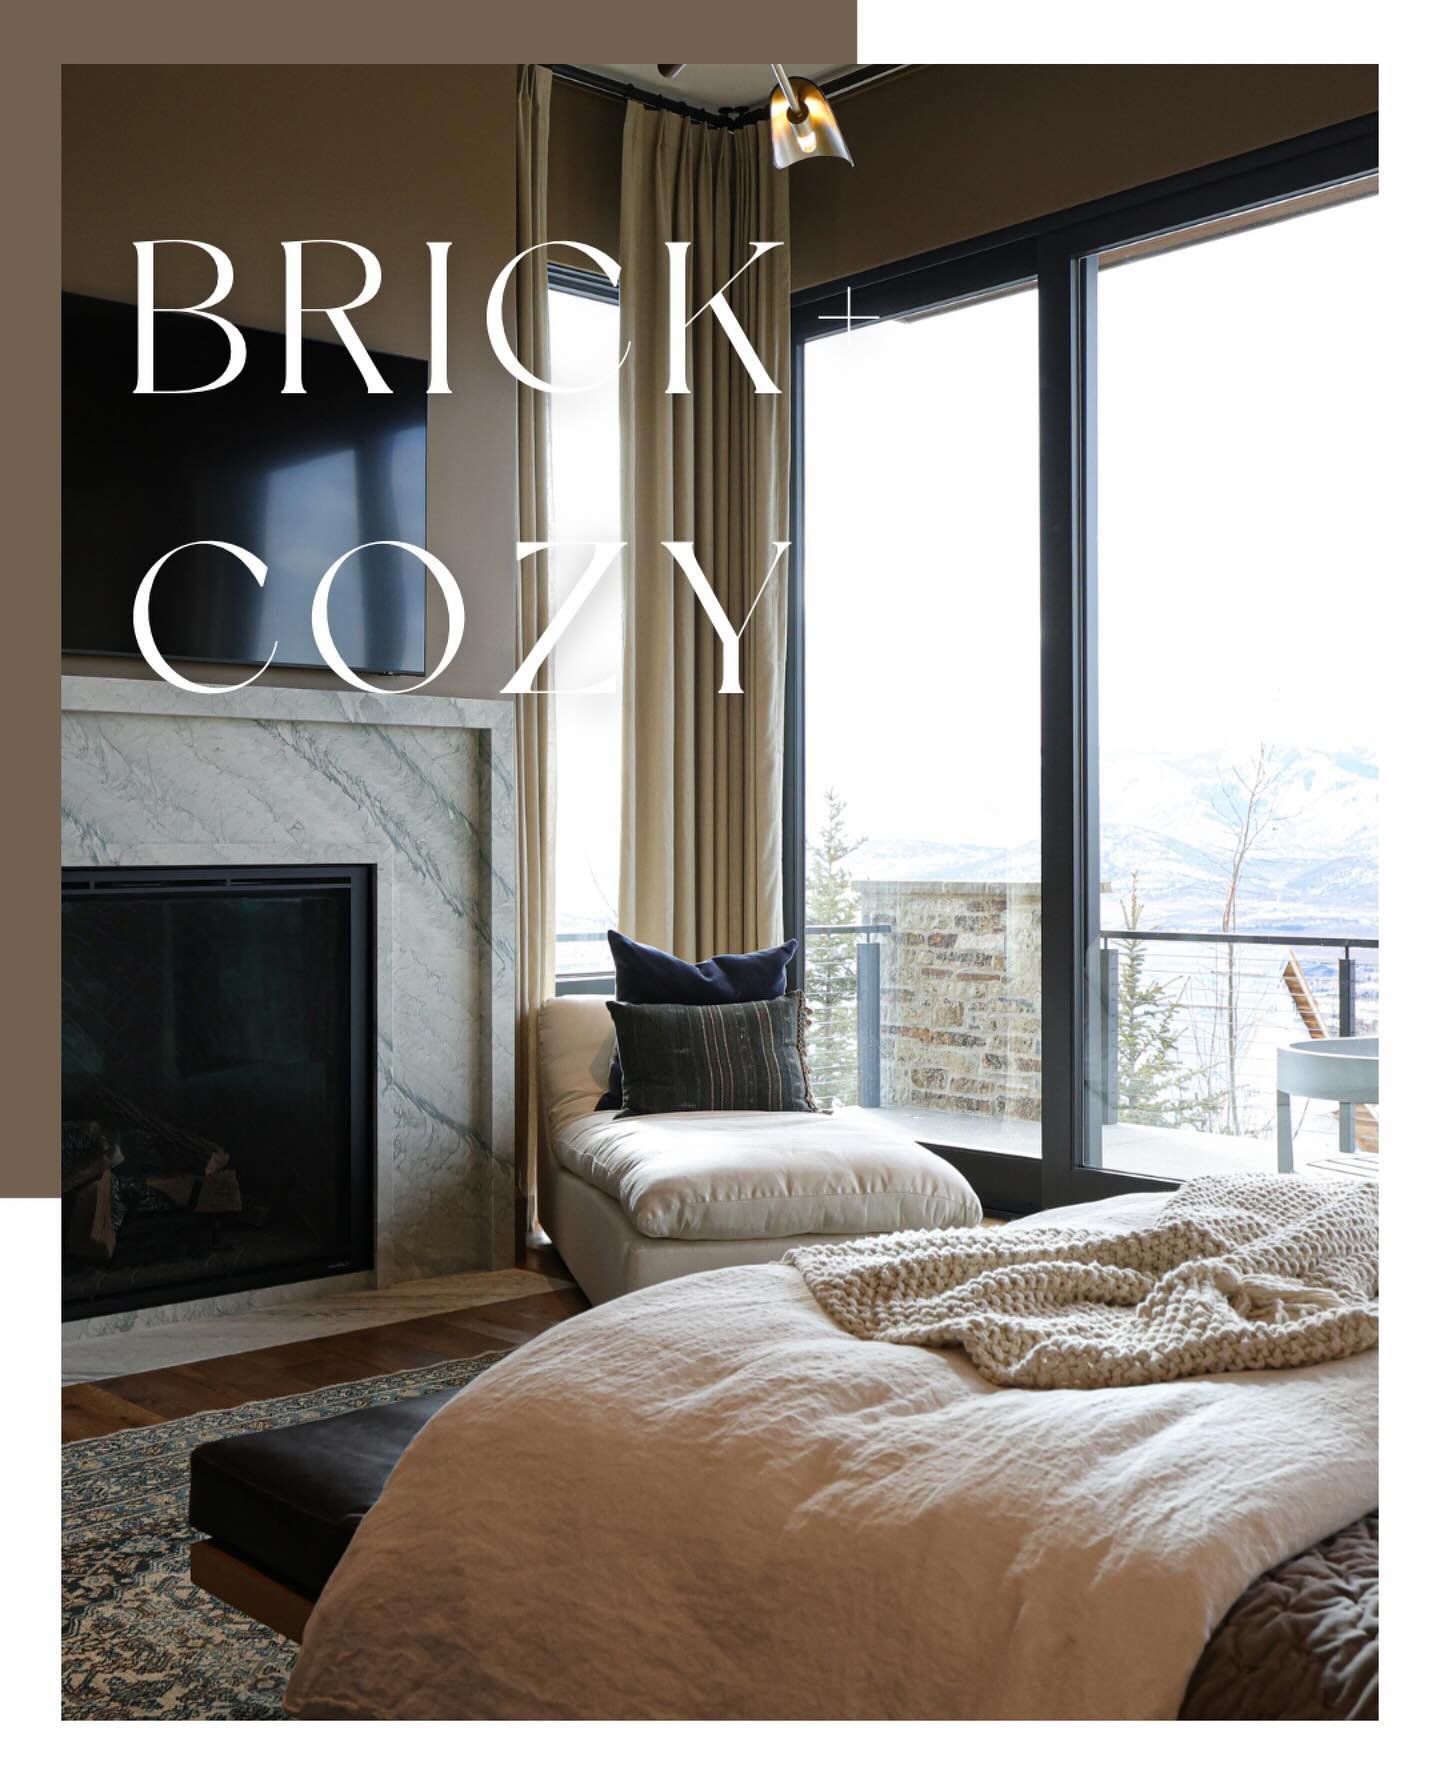 Join us as we look take a stroll through some of our favorite moments in the Brick + Cozy Project. 

#customcabinetryutah #parkcity #parkcityutah #parkcityhome #parkcitylifestyle #dreamhomegoals #cabinetmakers